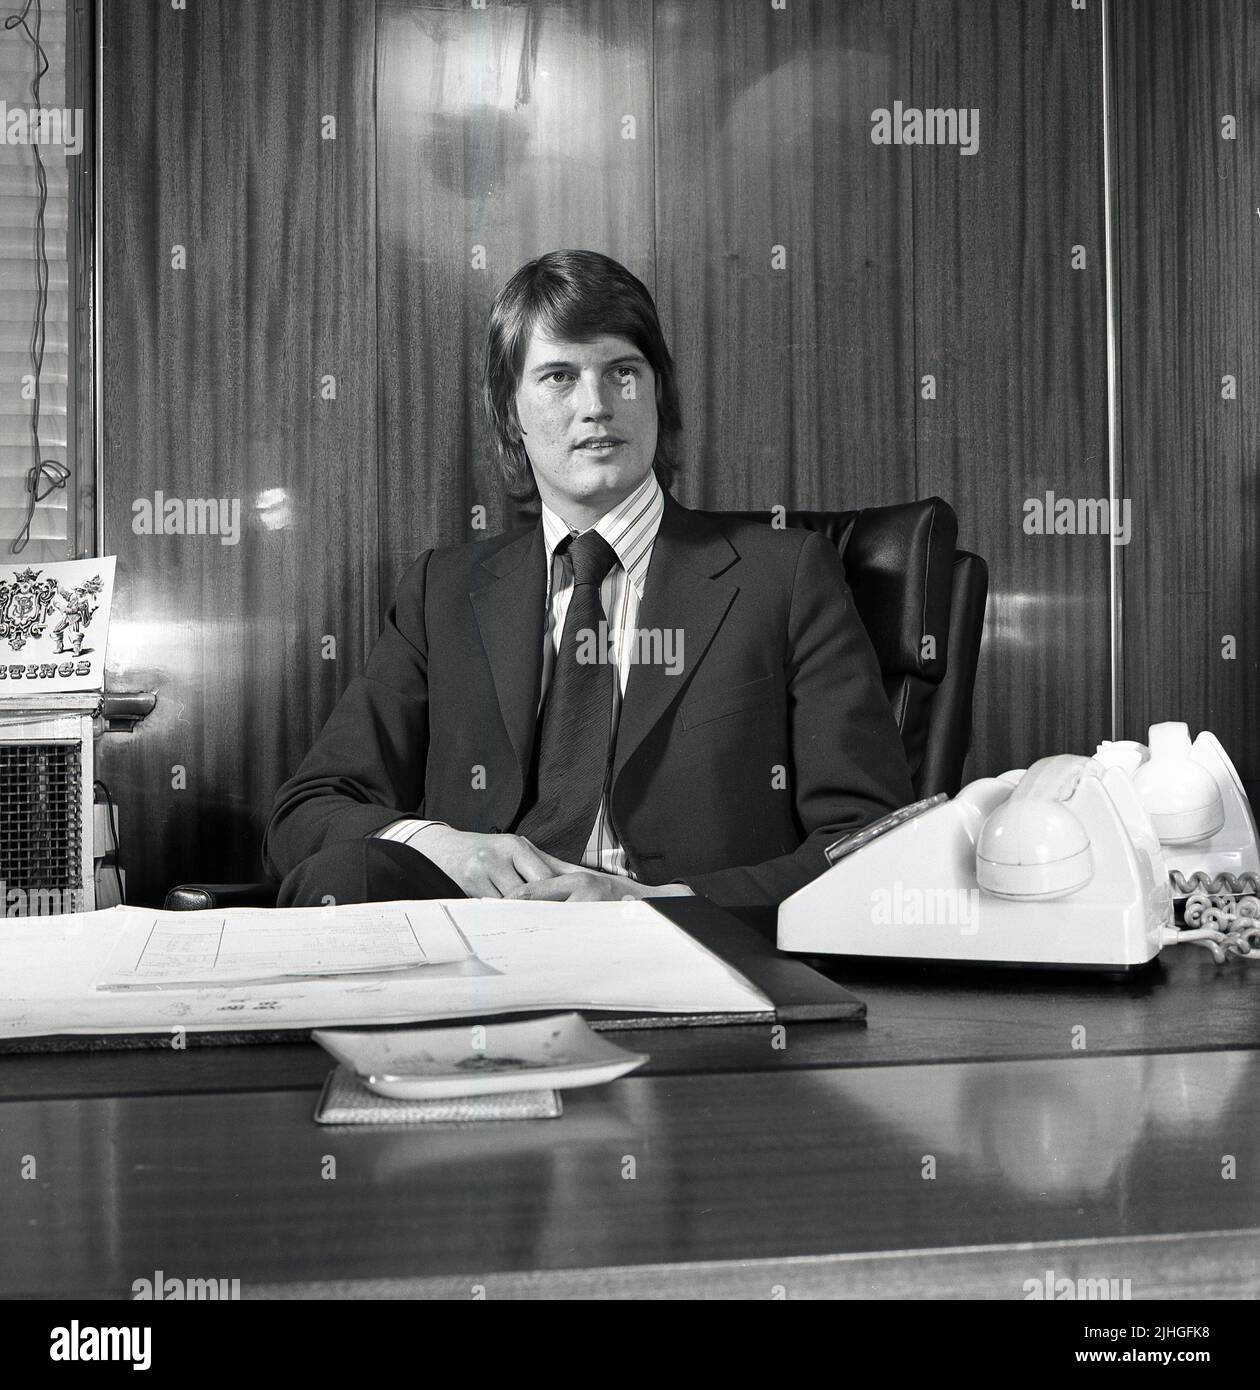 1975, historical, a young male suited car dealer sitting at his desk in his office, Croydon, South London, England, UK, with two telephones of the era. Stock Photo